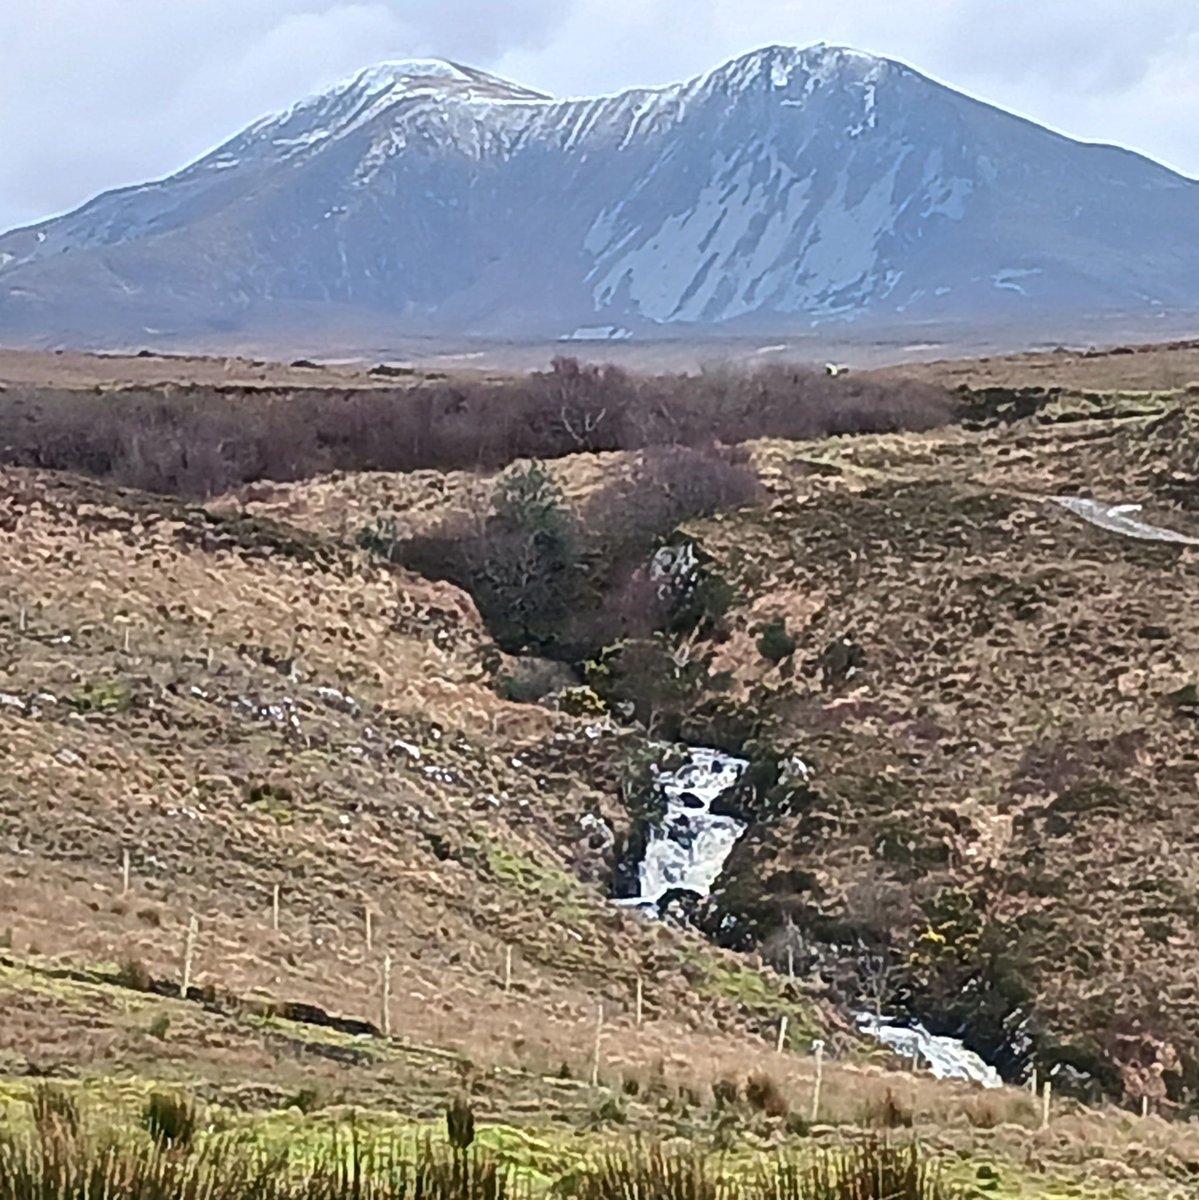 Exploring the serene beauty of Co. Donegal, where streams carve through blanket bogs under the watchful eye of Muckish Mountain. 🏞️ 🌱 #greenrestorationireland #farmcarboneip #ireland #donegal #bogs #wetlands #blanketbogs